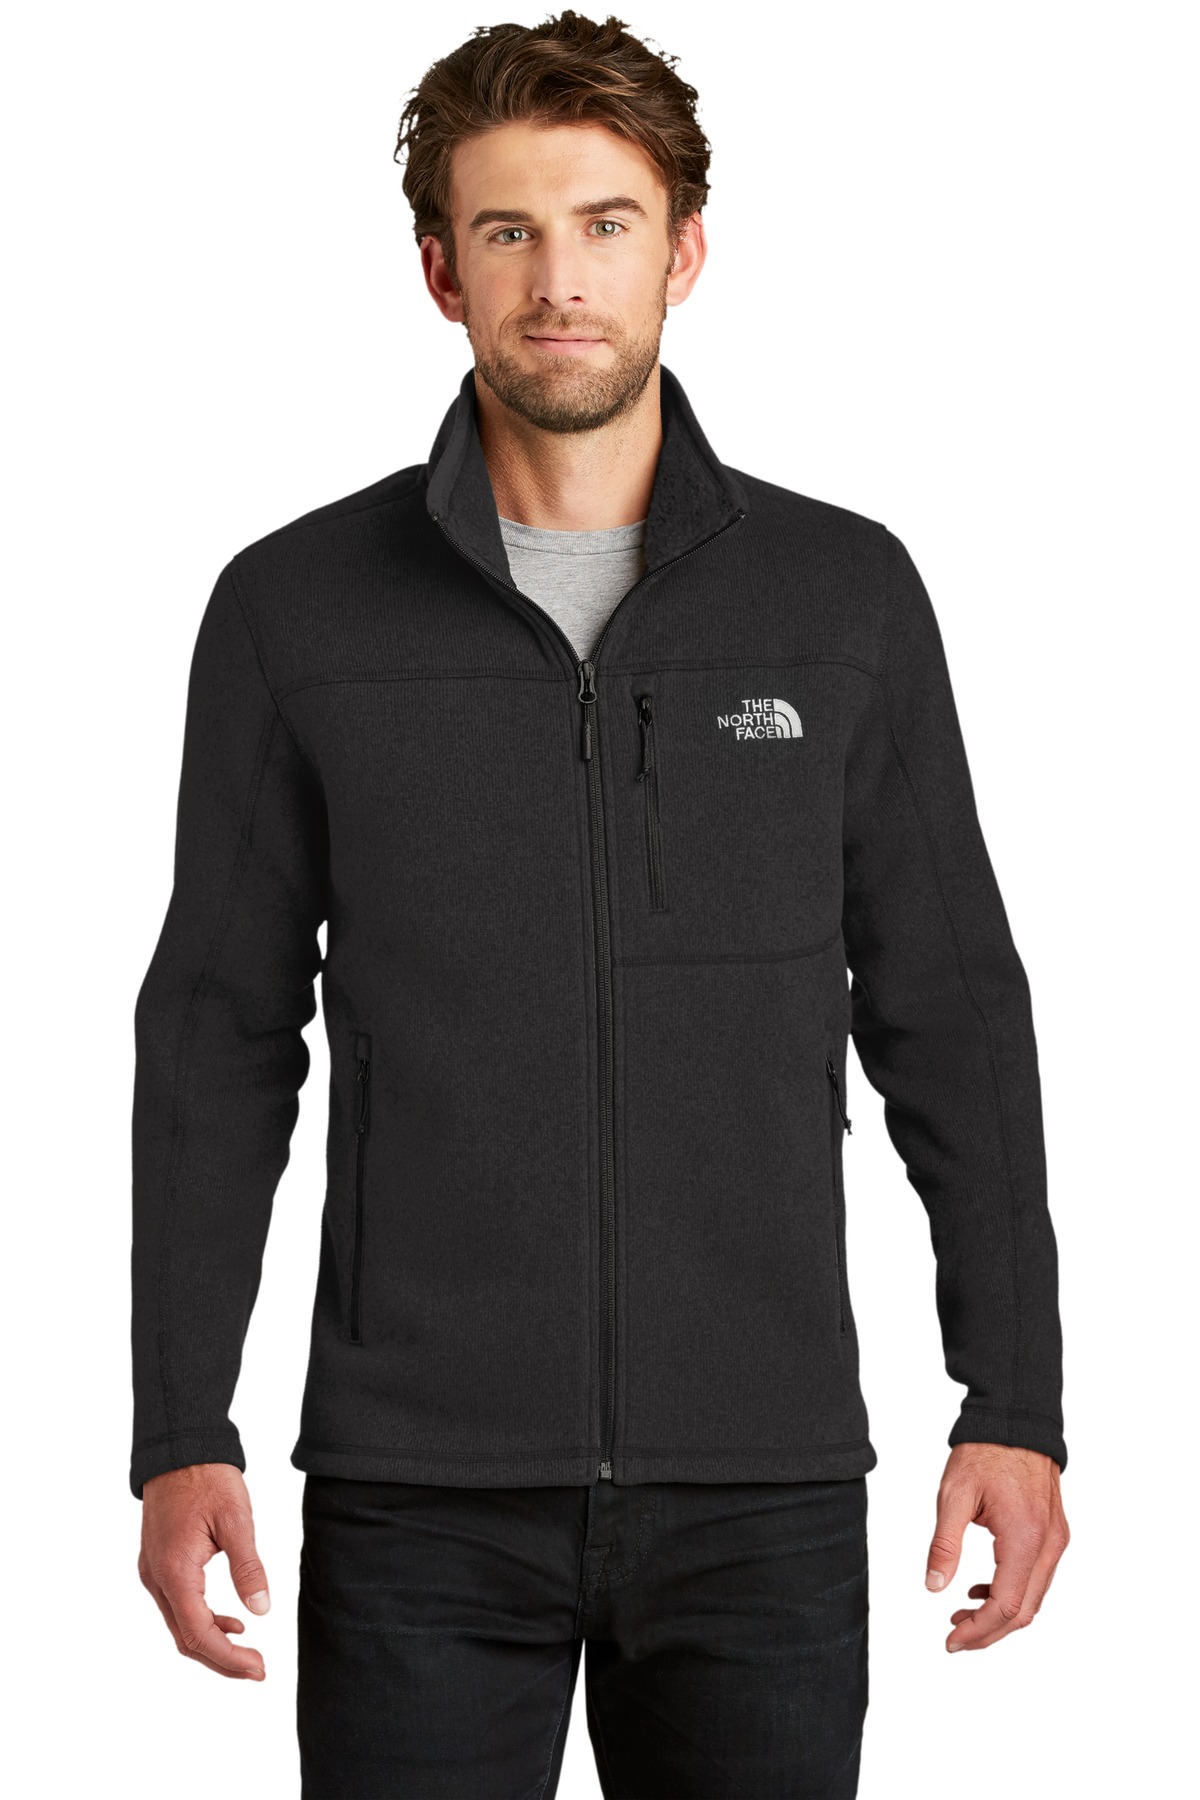 The North Face Sweater Fleece Jacket-